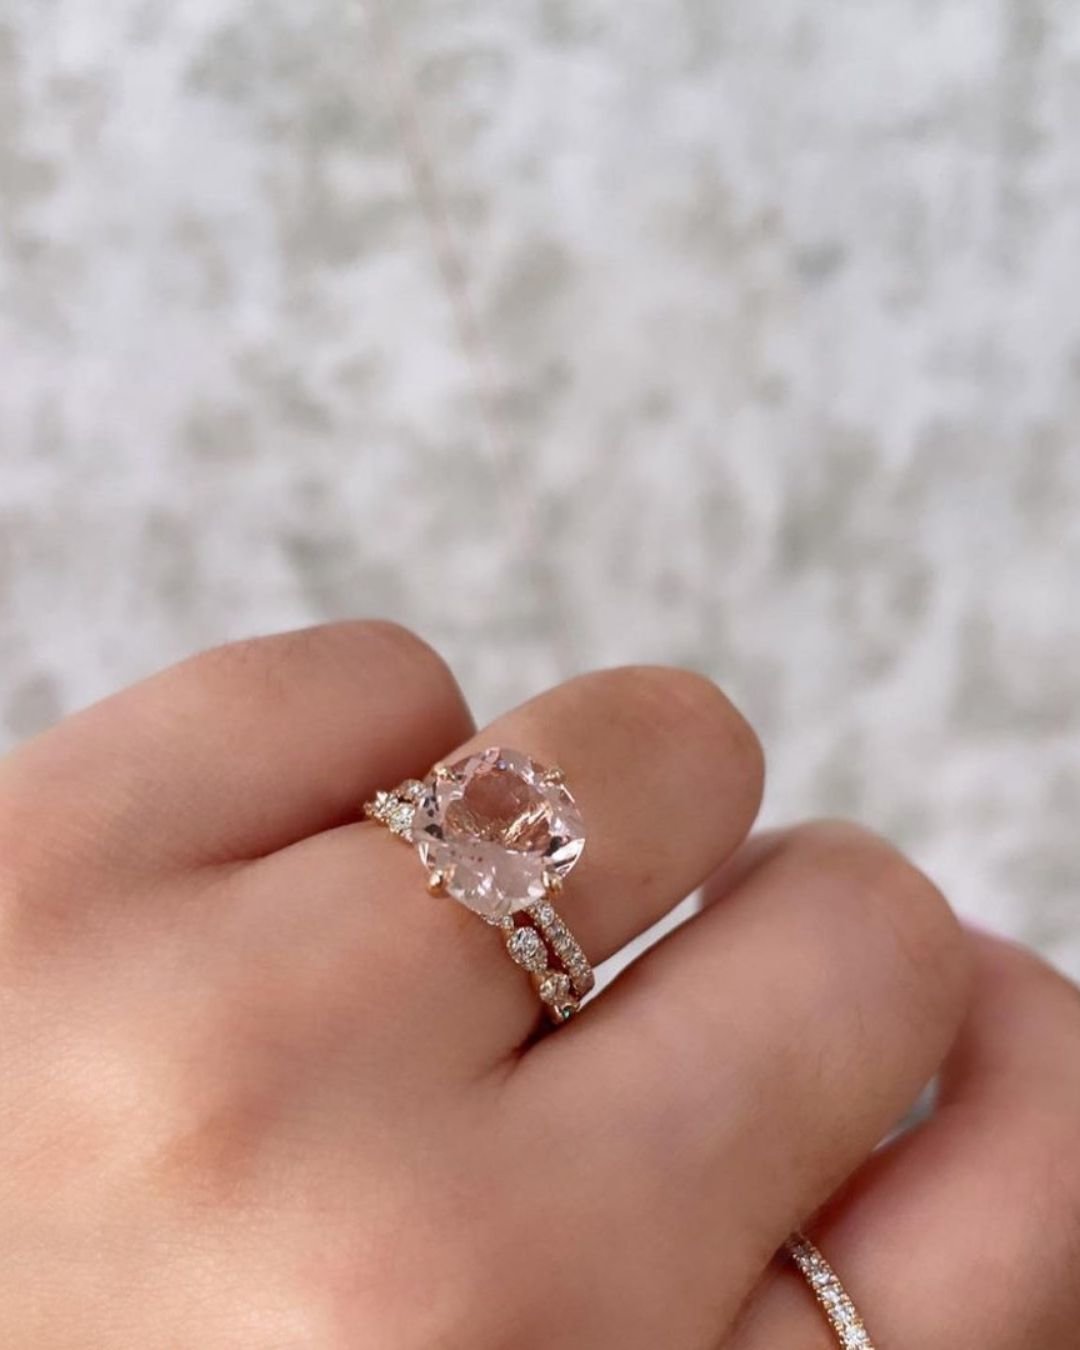 morganite engagement rings with amazing details1